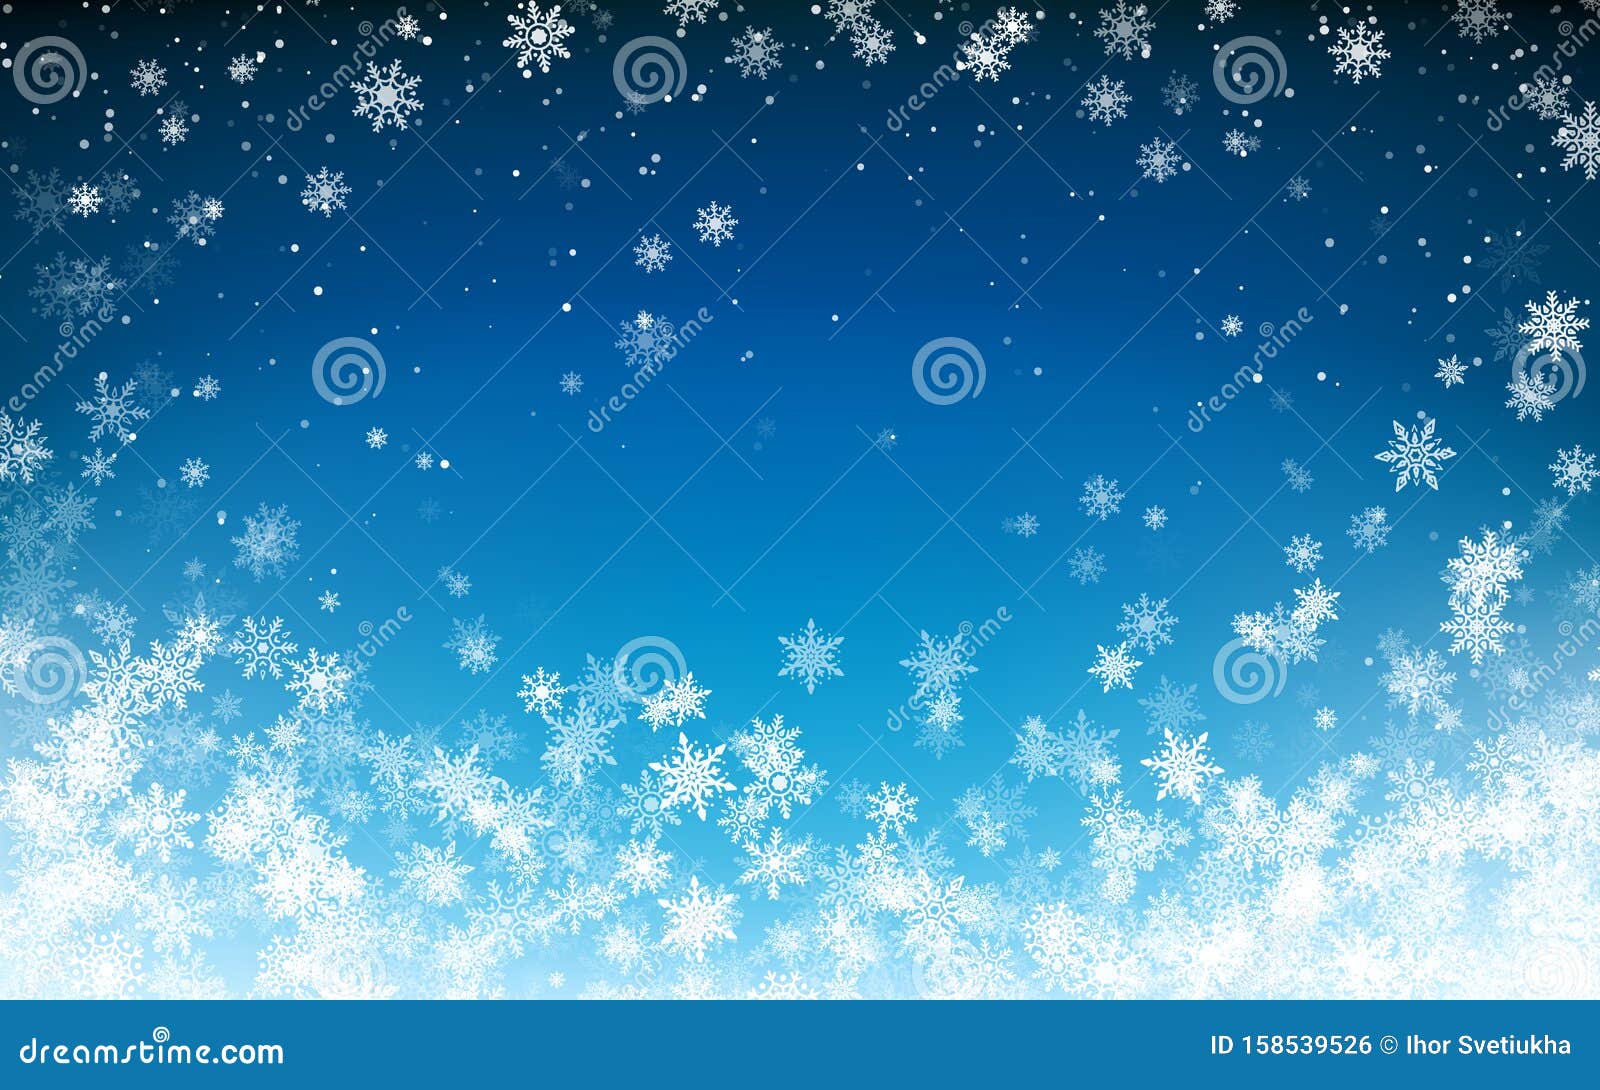 snowfall christmas background. flying snow flakes on night winter blue sky background. winter wite snowflake template. 